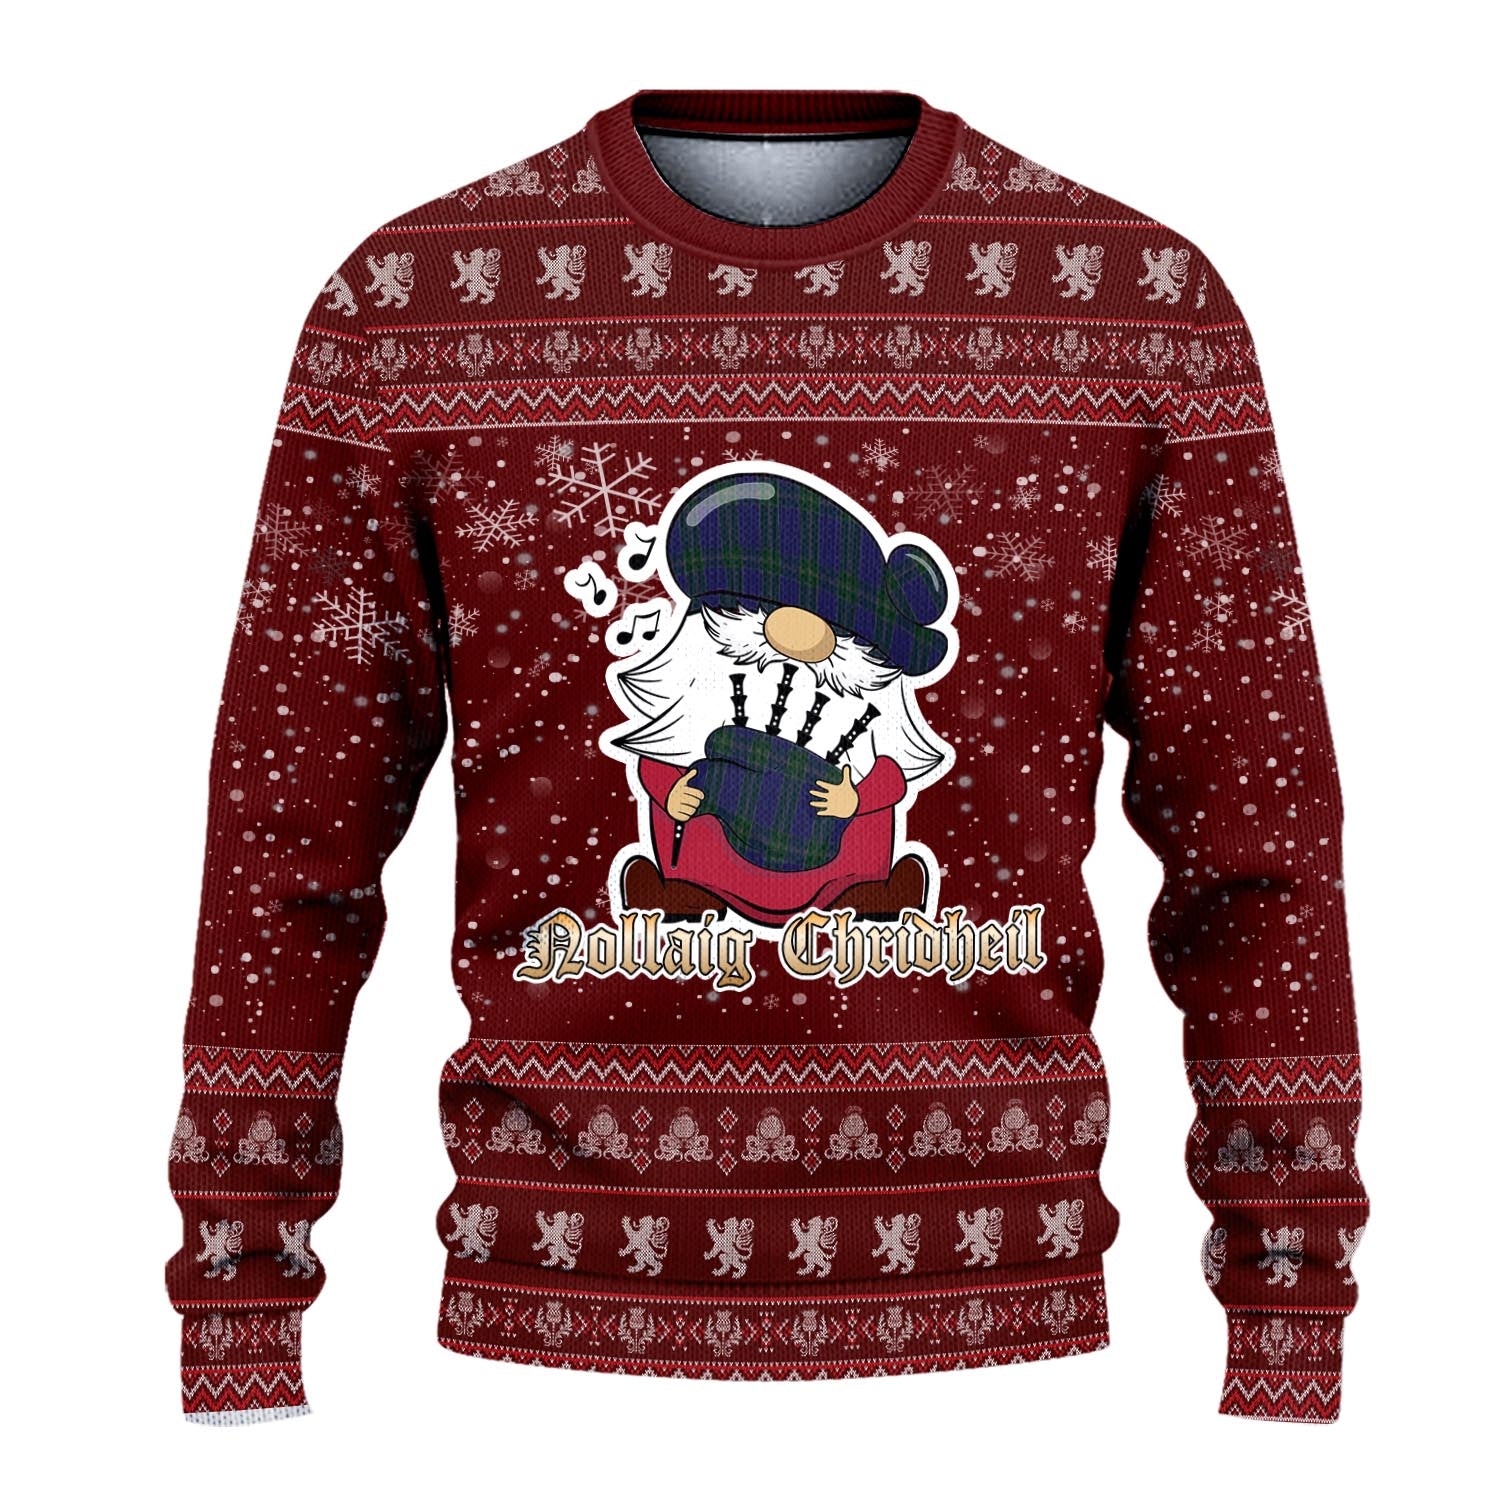 Lewis of Wales Clan Christmas Family Knitted Sweater with Funny Gnome Playing Bagpipes - Tartanvibesclothing